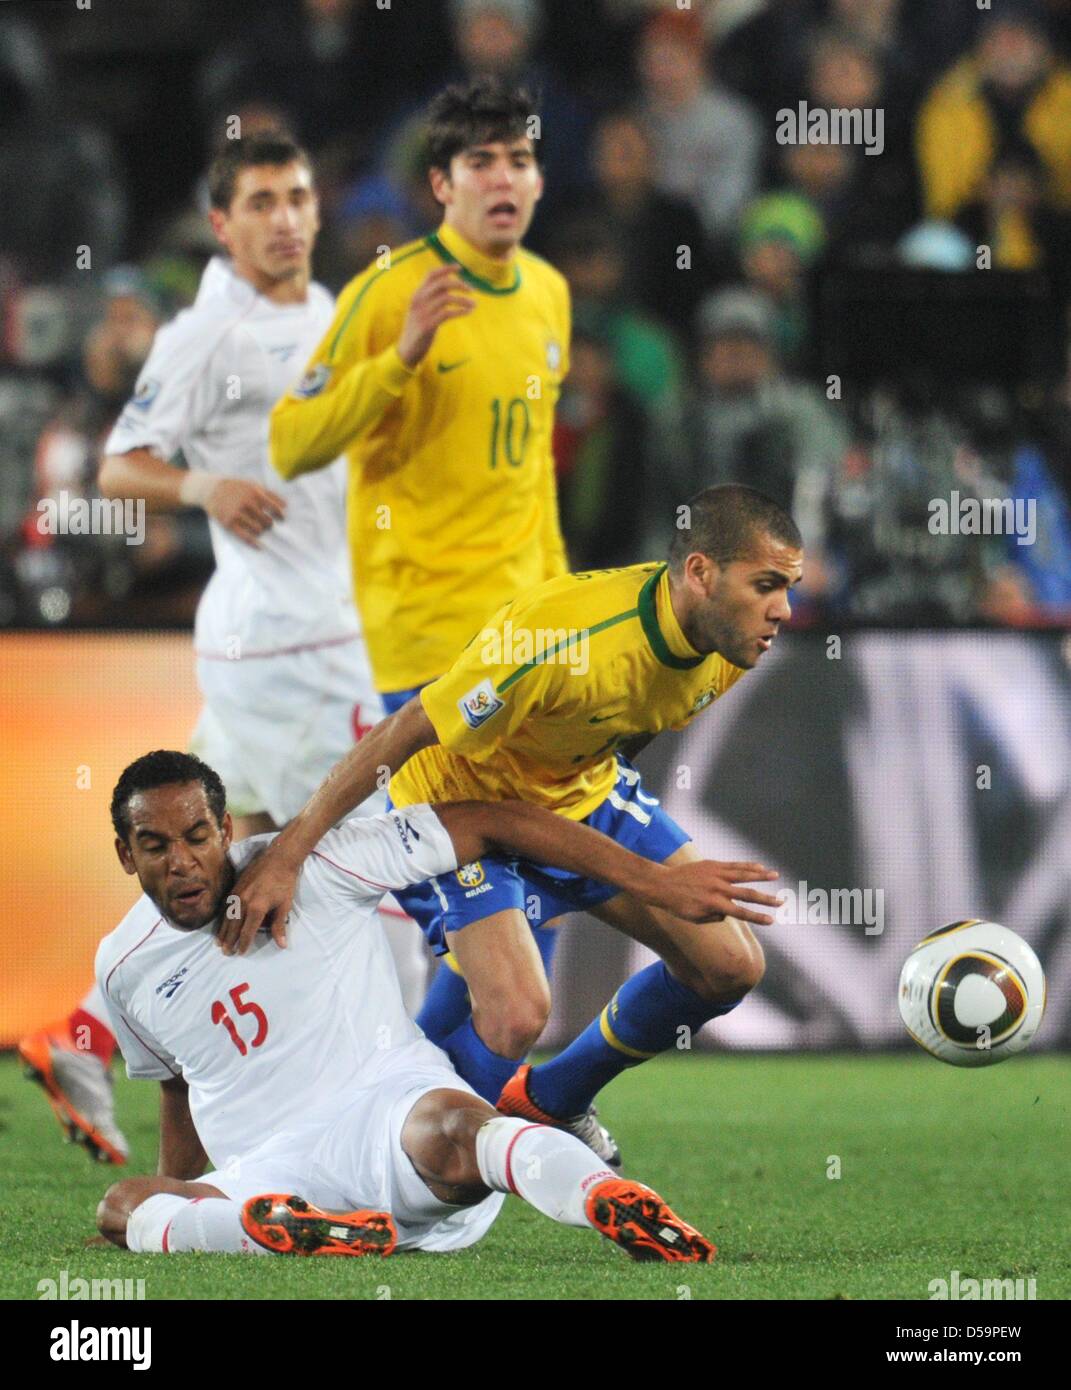 Jean Beausejour (L) of Chile vies with Dani Alves (R) of Brazil during the 2010 FIFA World Cup Round of Sixteen match between Brazil and Chile at the Ellis Park Stadium in Johannesburg, South Africa 28 June 2010. Photo: Bernd Weissbrod dpa - Please refer to http://dpaq.de/FIFA-WM2010-TC Stock Photo